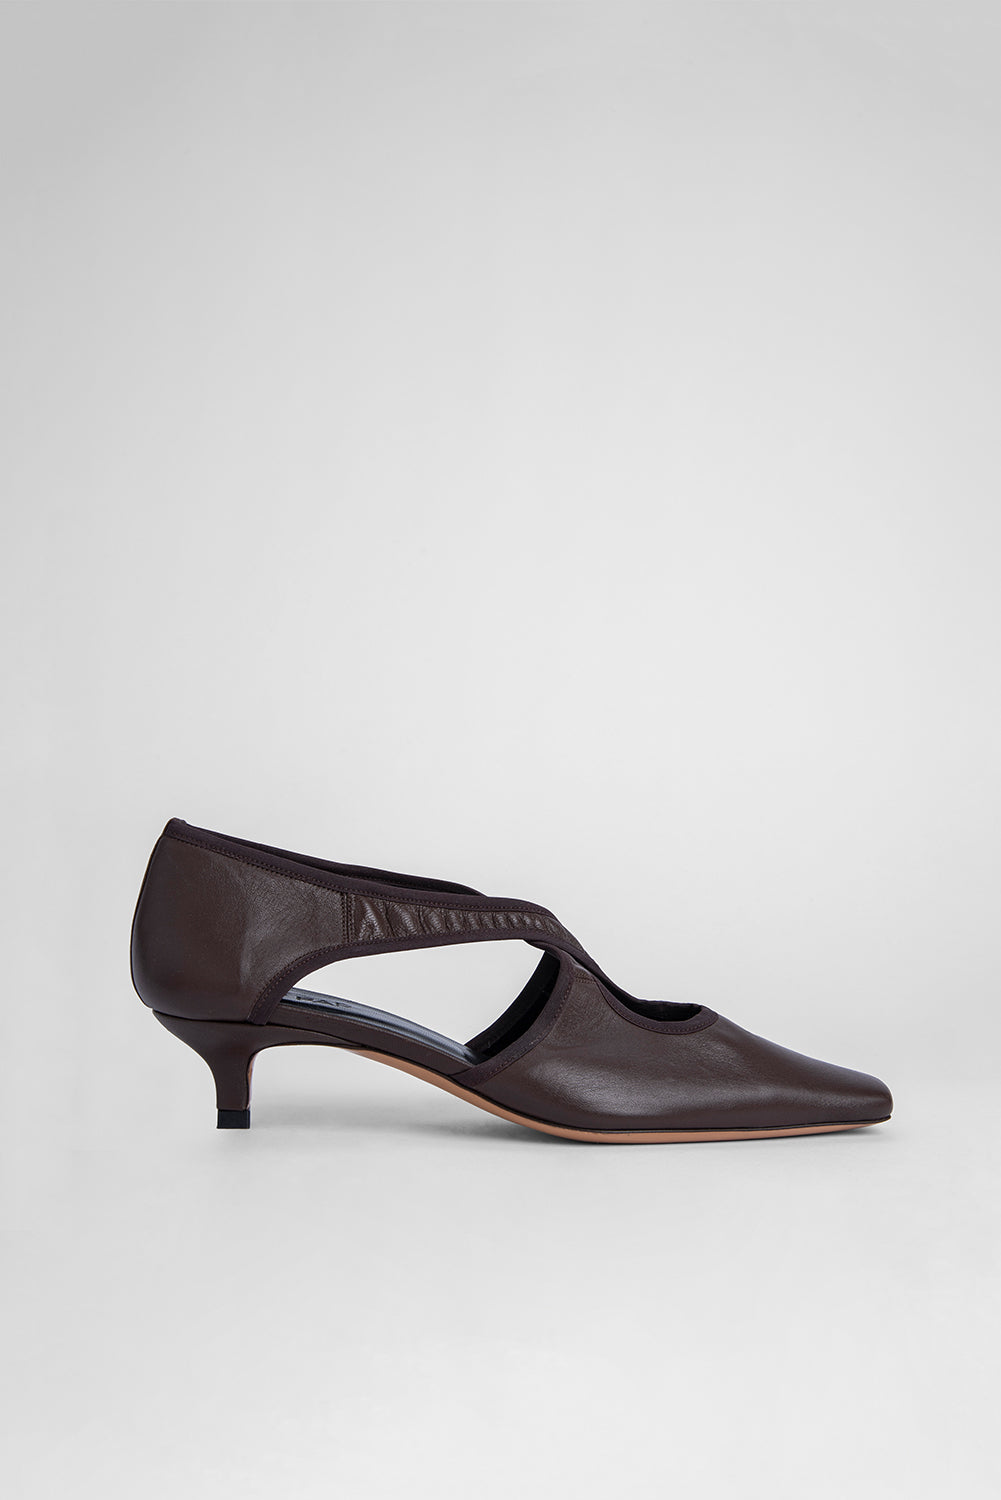 Adele Brown Stretch Leather